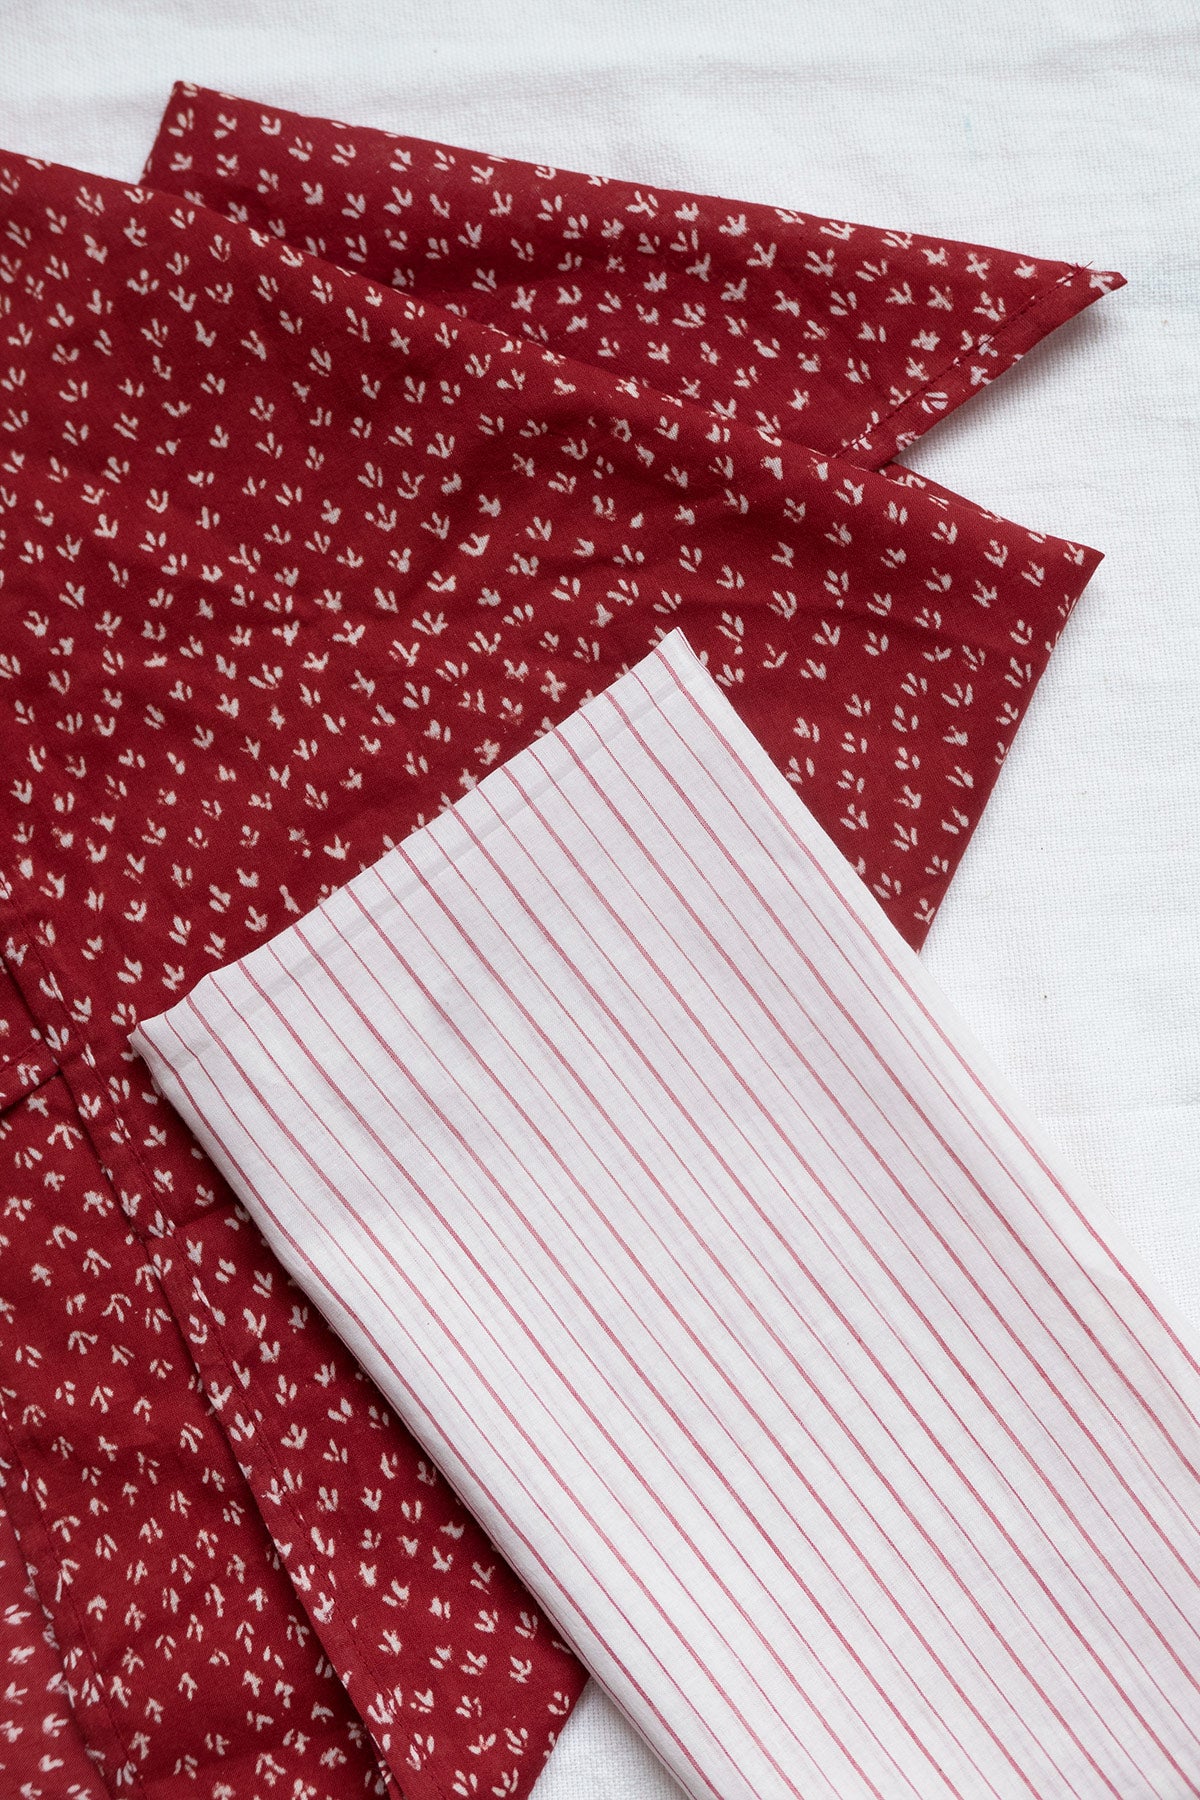 Set of Two Bandanas in Cherry Red and White Cotton